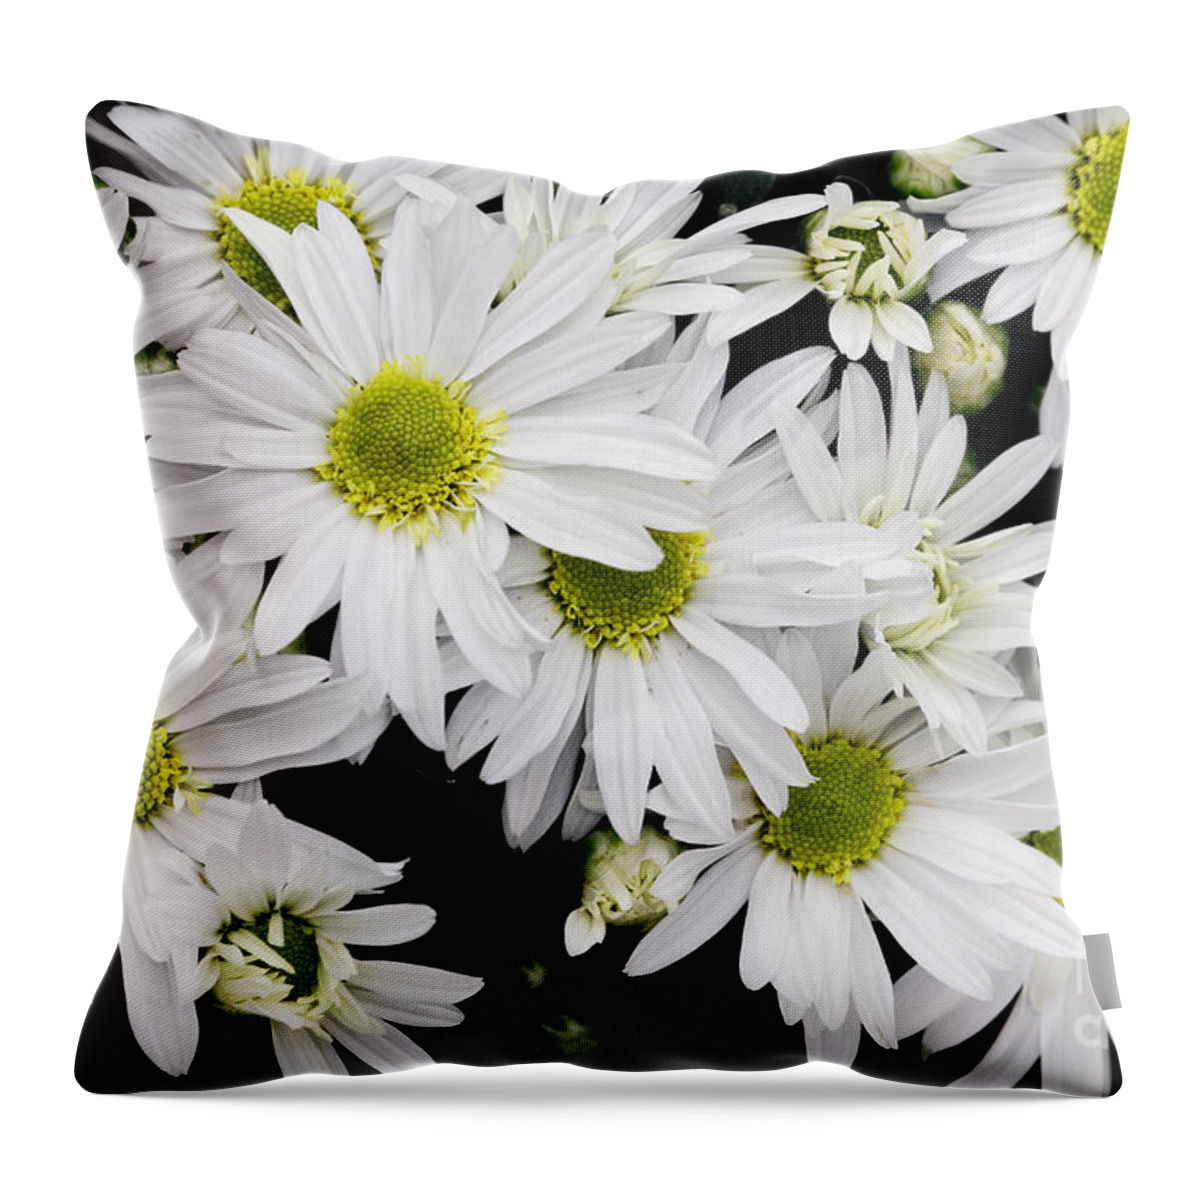 White Throw Pillow featuring the photograph White Chrysanthemums by Stephanie Frey